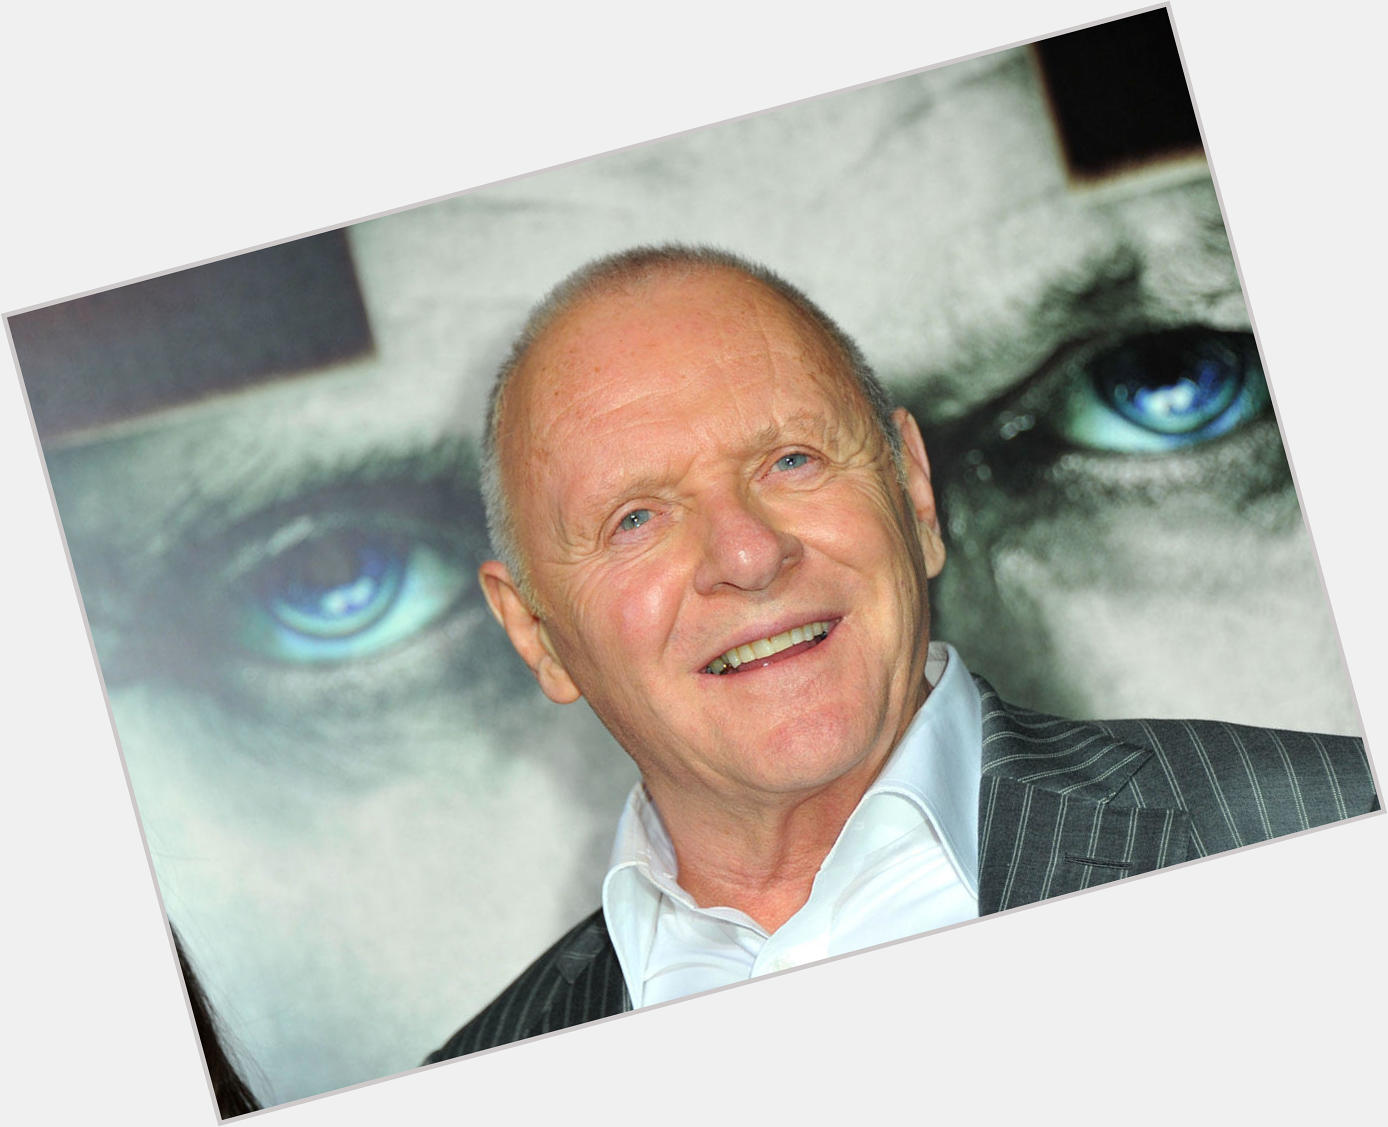 Happy Birthday to Anthony Hopkins! What movies do you recognize him from? 